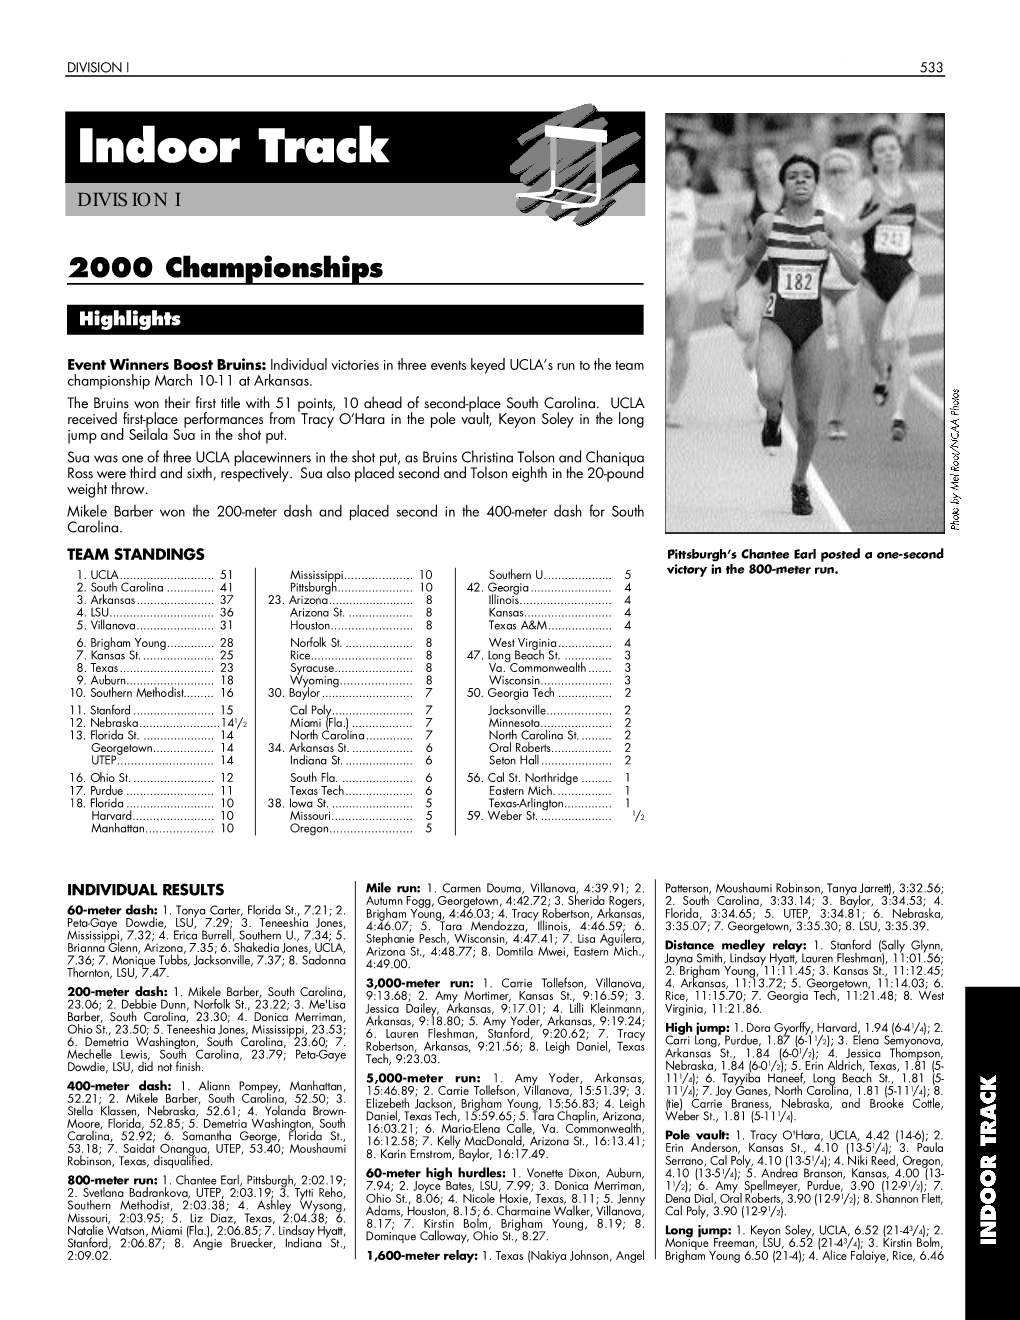 1999-00 NCAA Women's Indoor Track and Field Championships Records